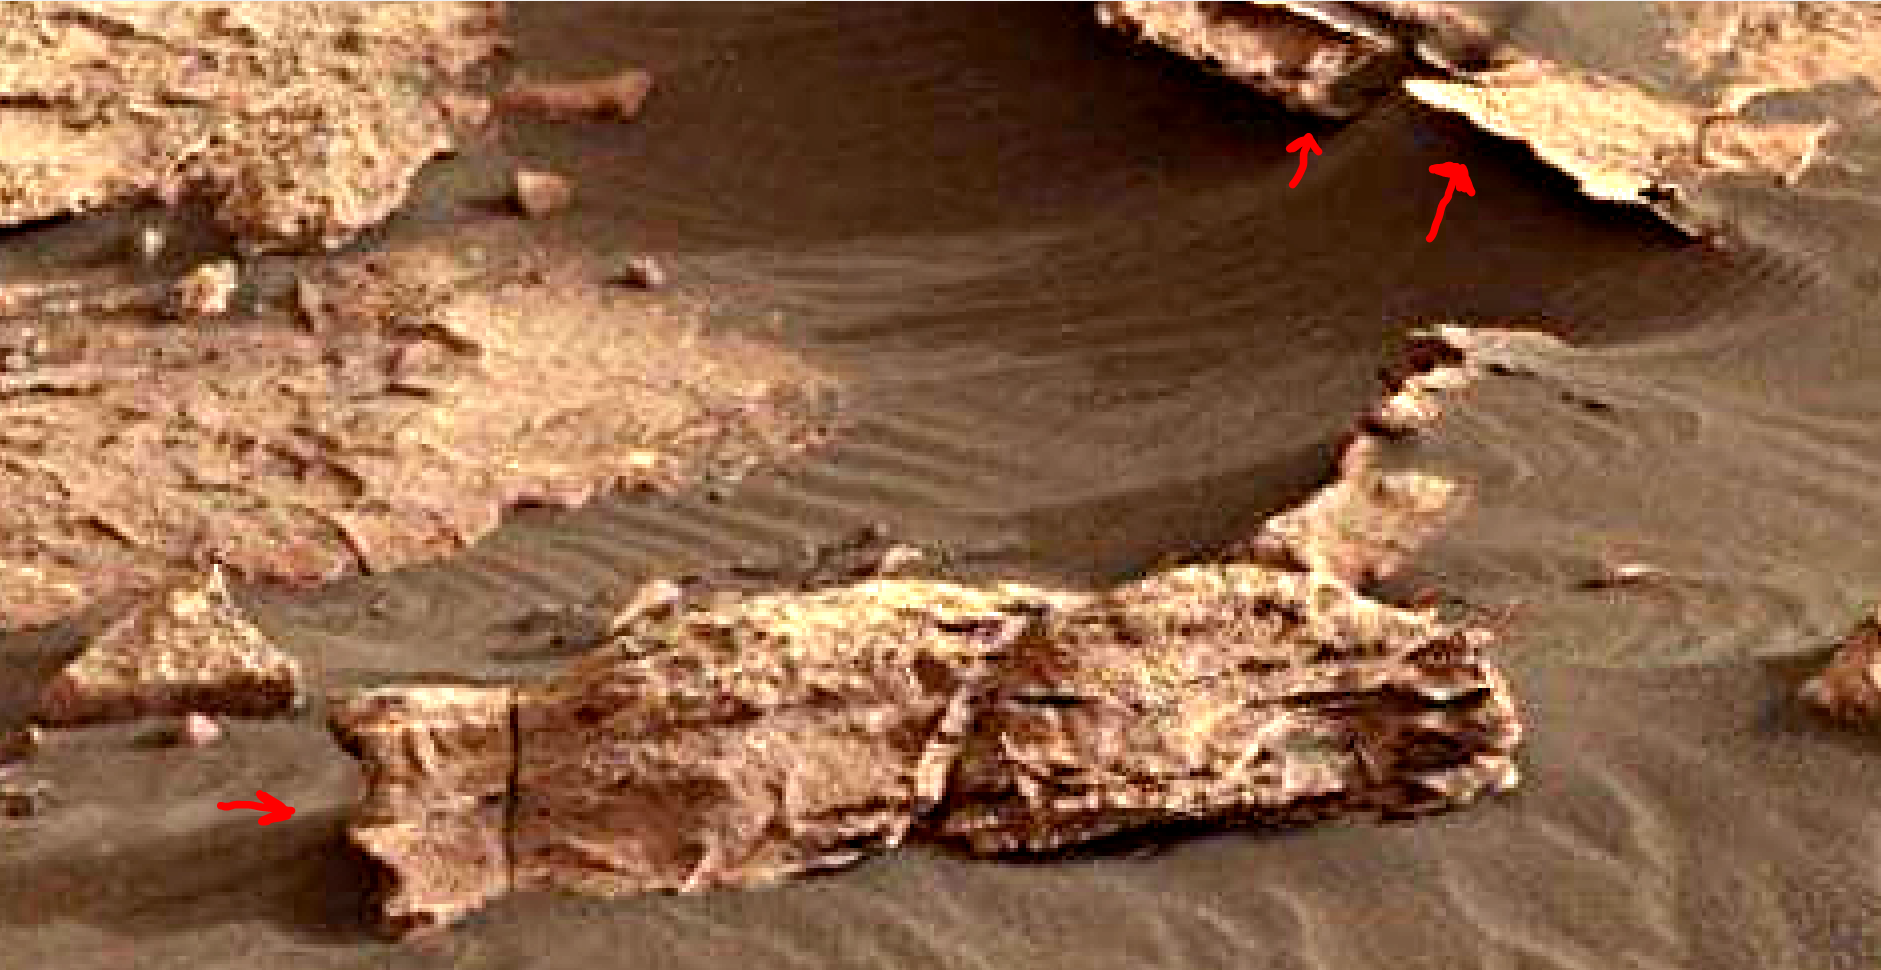 mars-sol-1512-anomaly-artifacts-3-was-life-on-mars